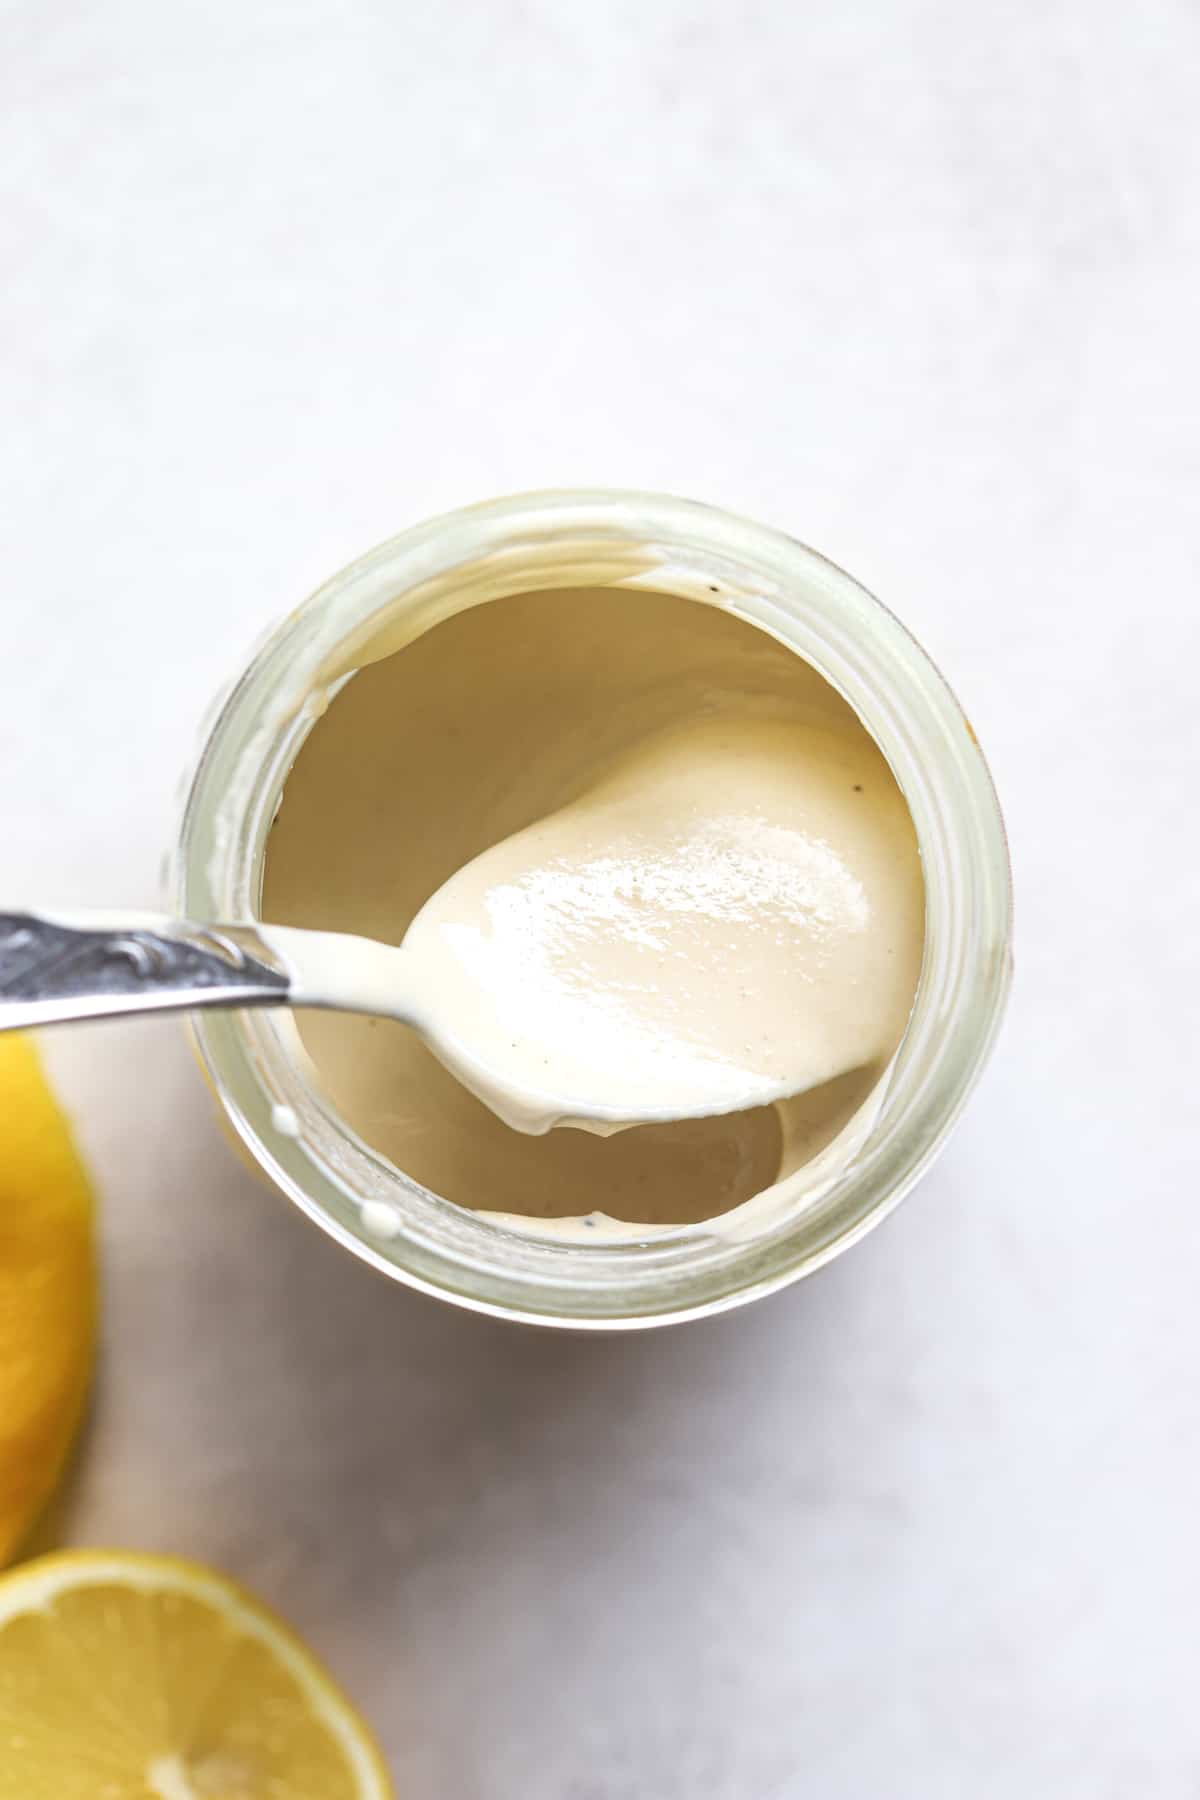 Tahini sauce in small glass jar with spoon and lemons on the side, on gray and white surface